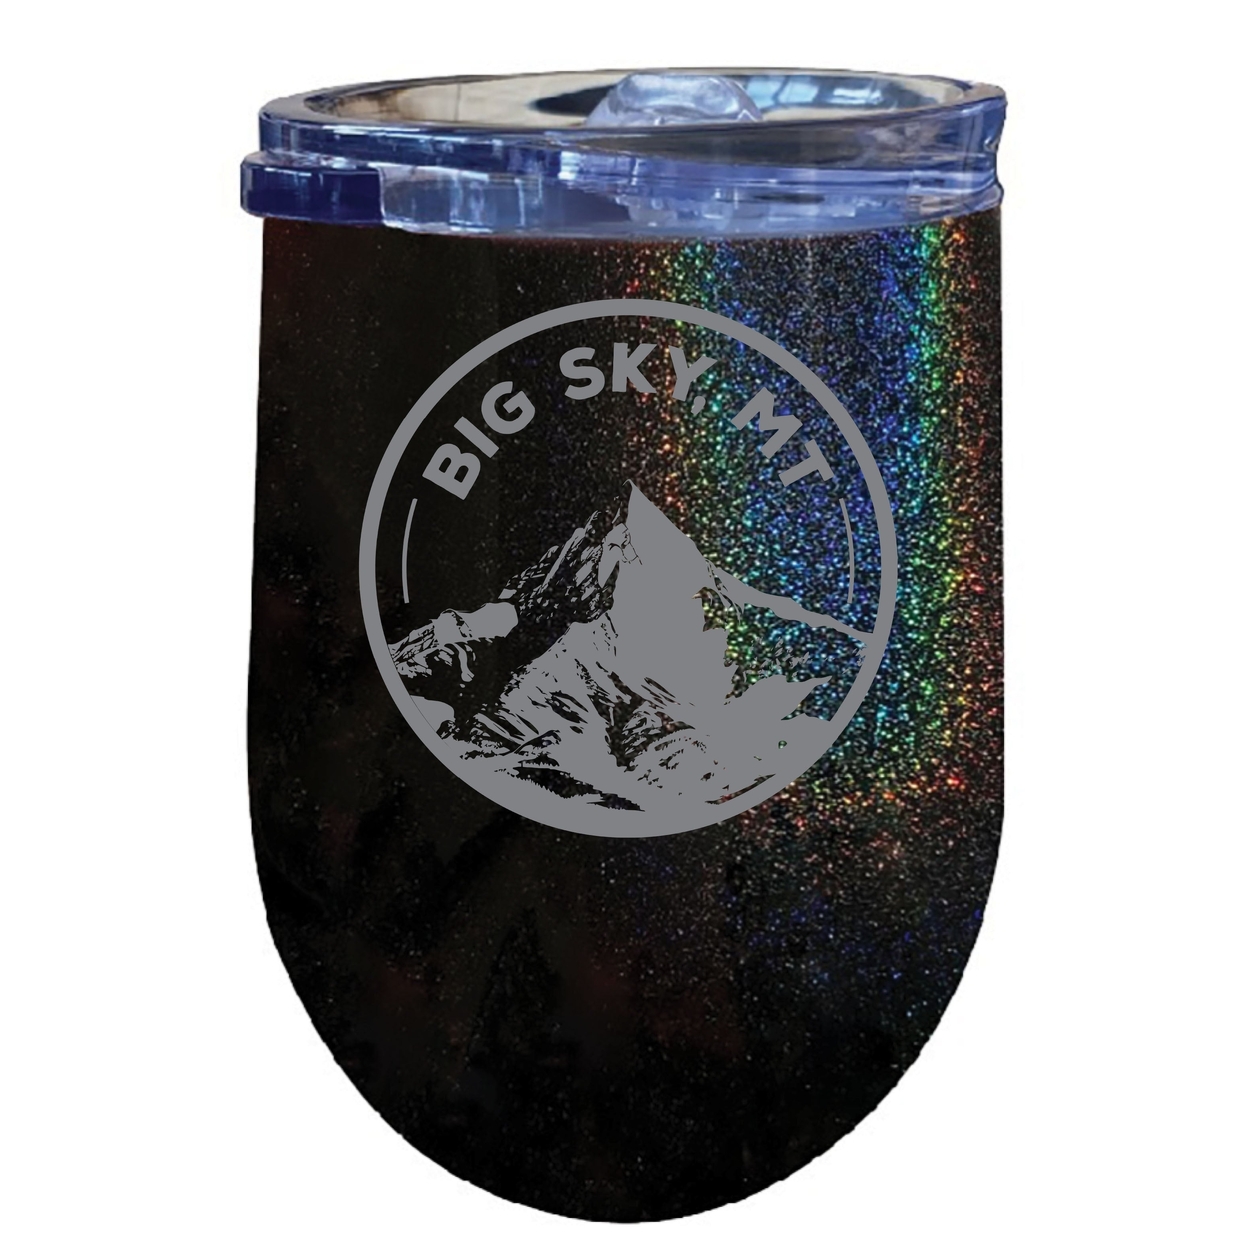 Big Sky Montana Souvenir 12 Oz Engraved Insulated Wine Stainless Steel Tumbler - Black,,4-Pack